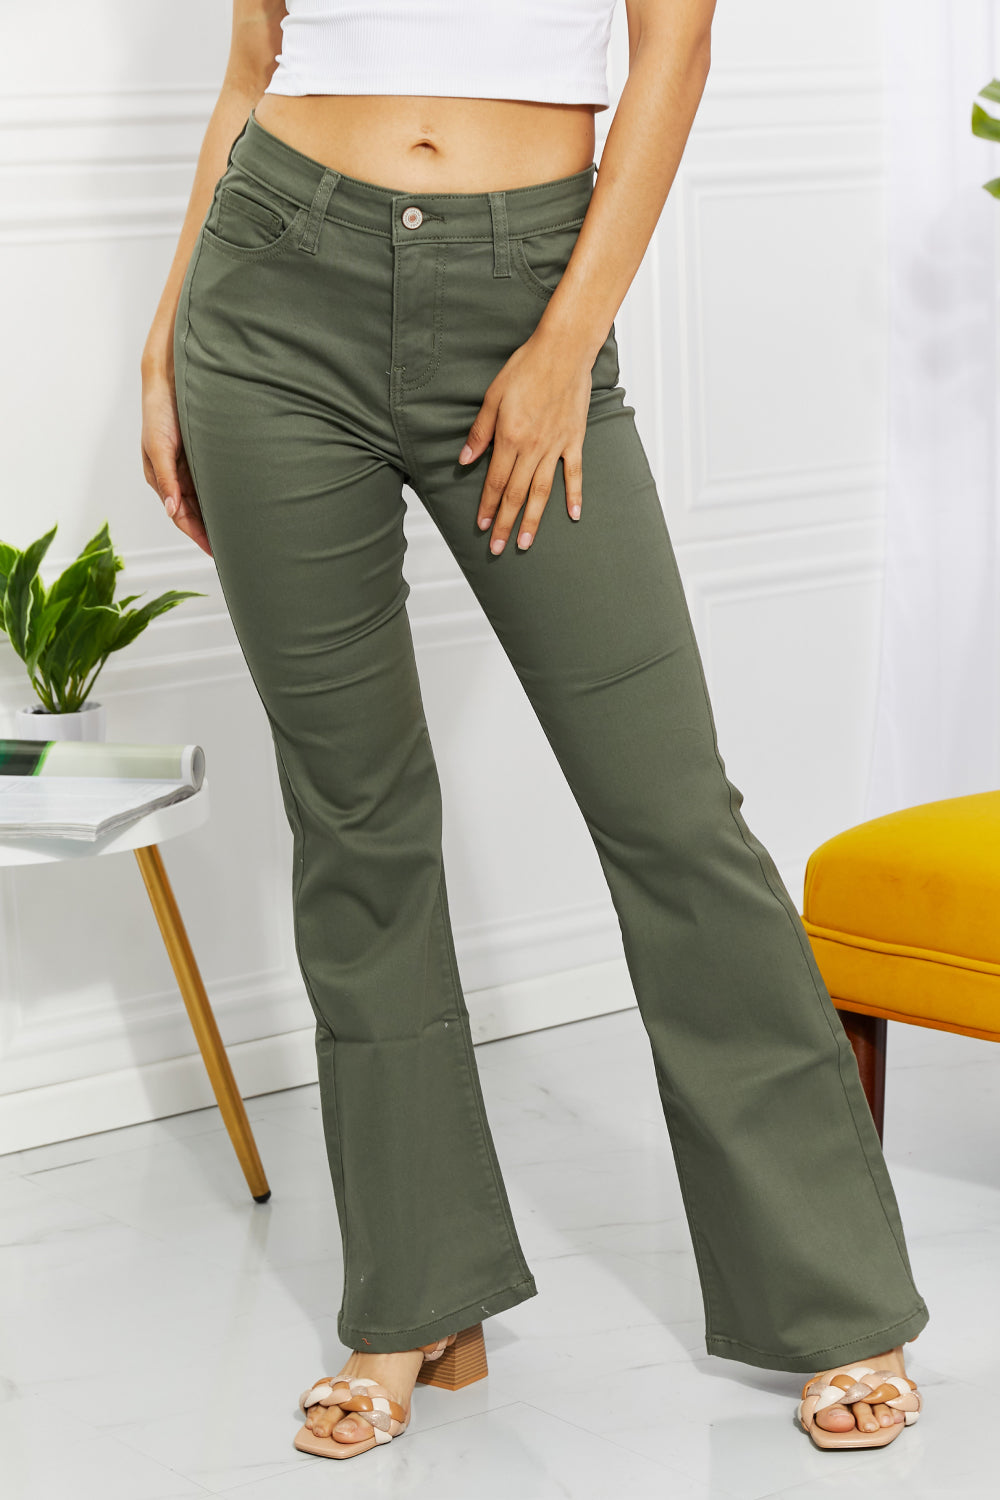 Clementine Bootcut Jeans in Olive - Copper + Rose